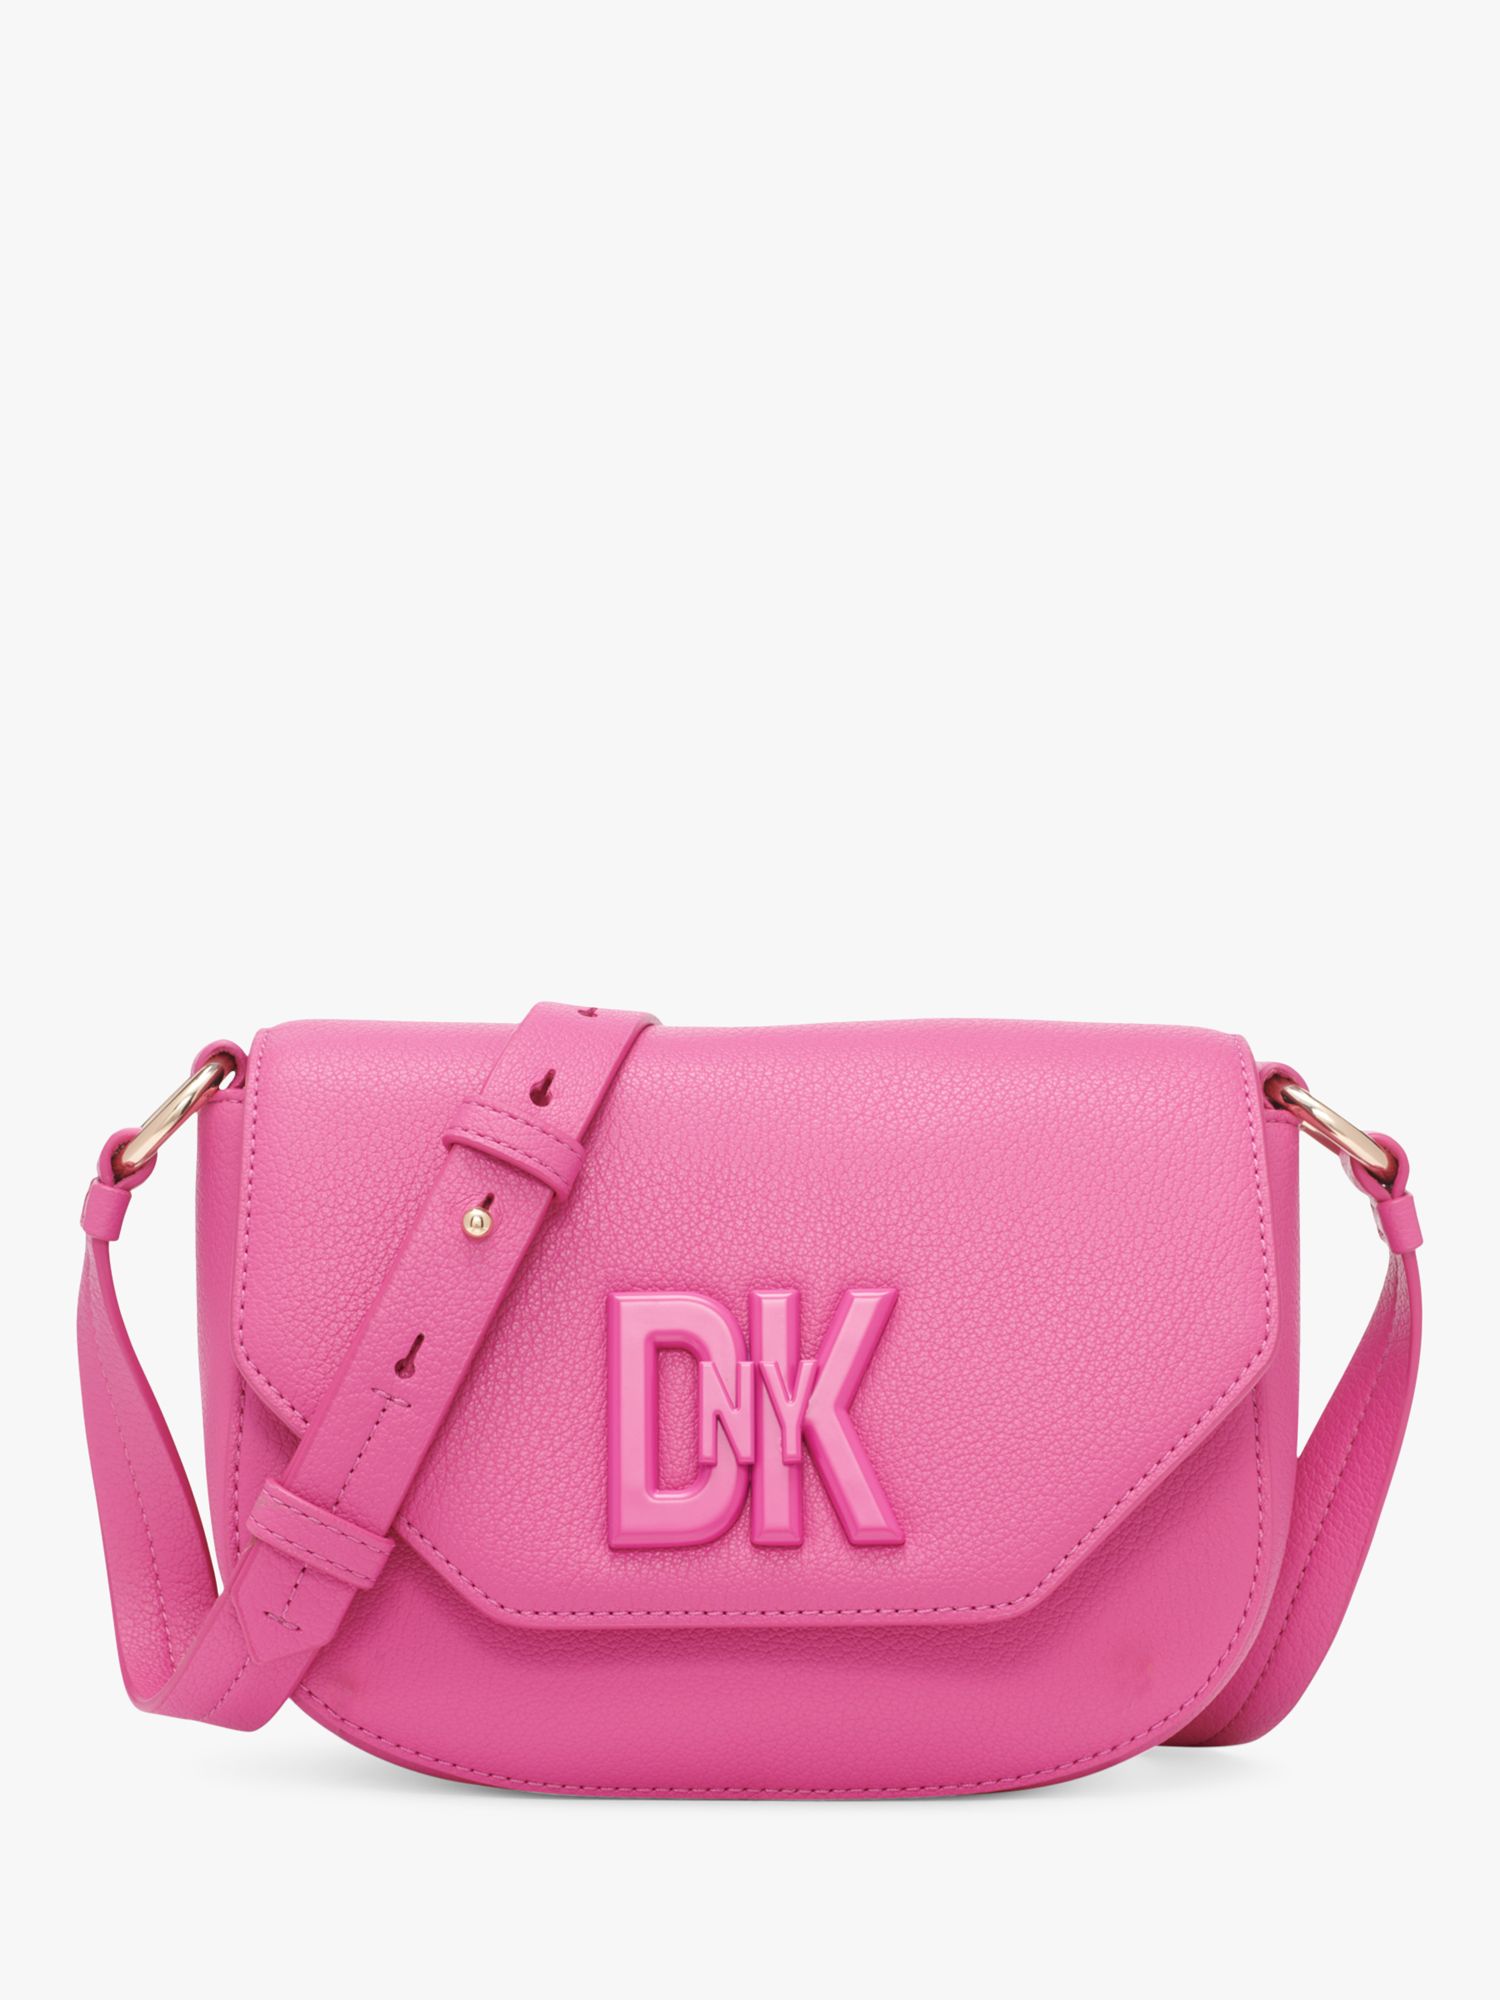 DKNY 7th Avenue Leather Cross Body Bag, Wisteria at John Lewis & Partners